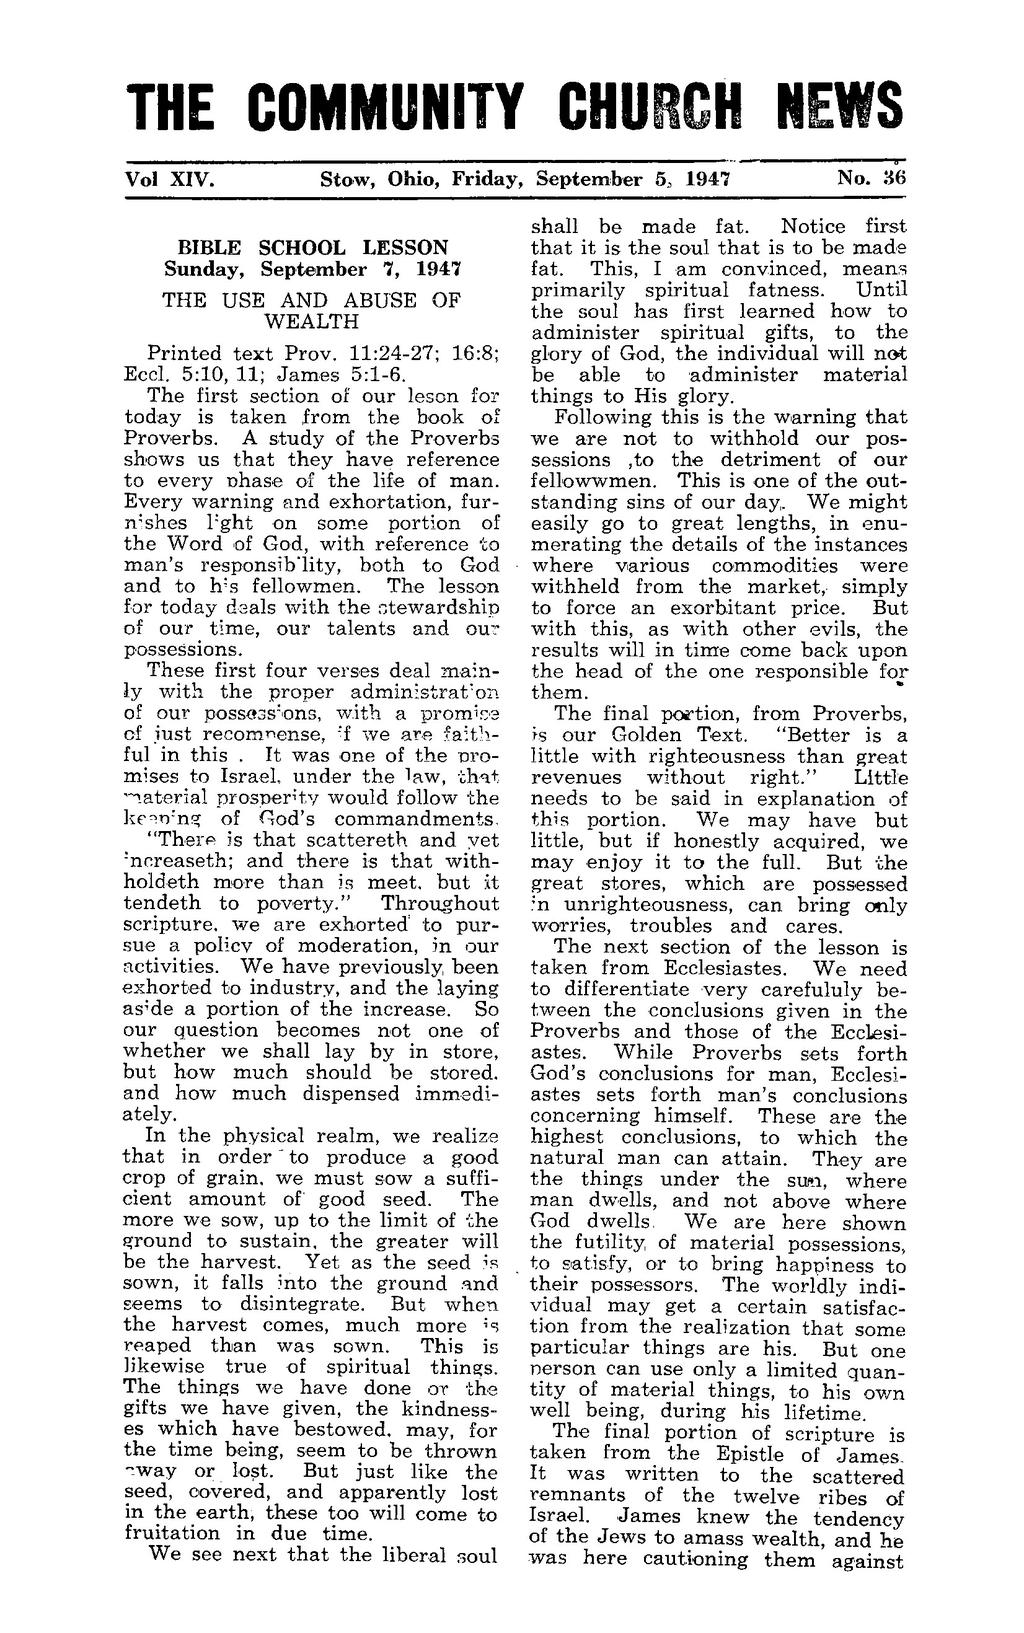 THE COMMUNITY CHURCH NEWS Vol XIV. Stow, Ohio, Friday, September 5, 1947 BIBLE SCHOOL LESSON Sunday, September 7, 1947 THE USE AND ABUSE OF WEALTH Printed text Prov. 11:24-27; 16:8; Eccl.